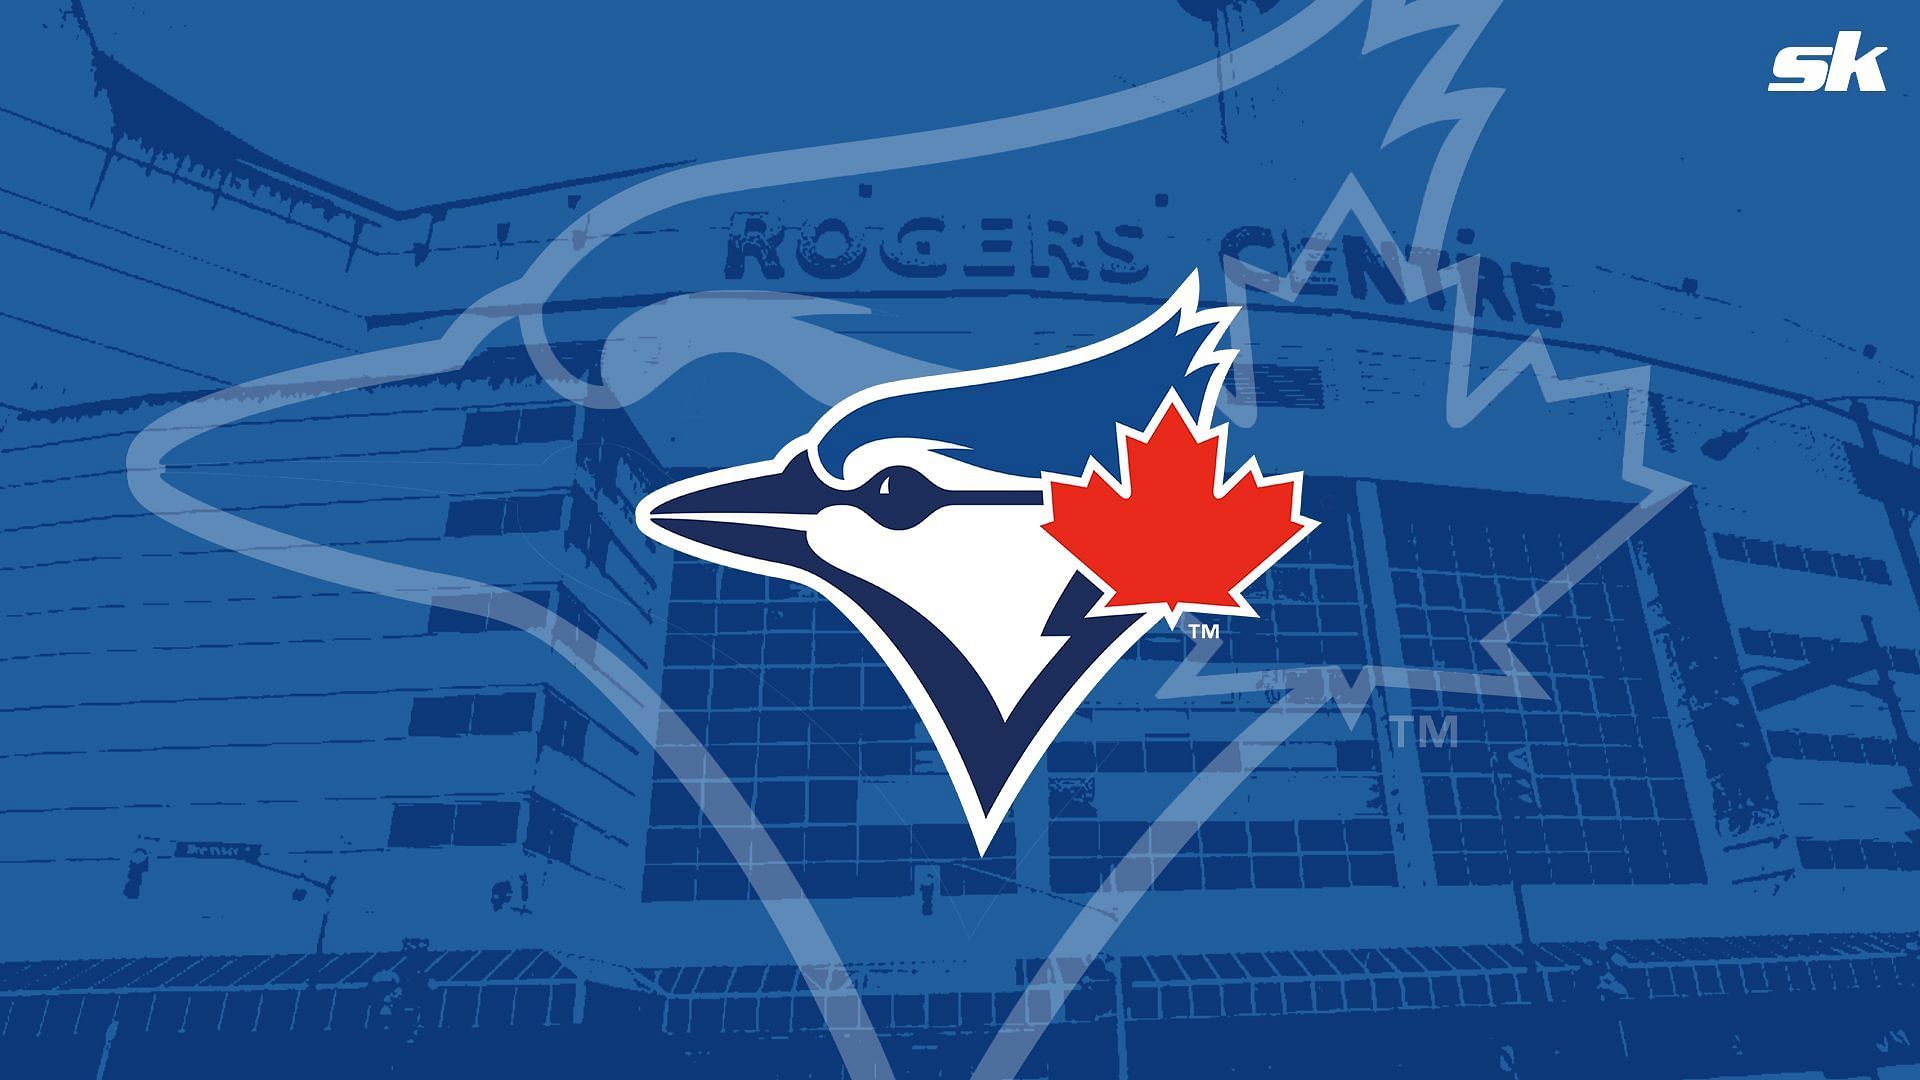 Rogers Centre remains one of the most innovative stadiums in MLB